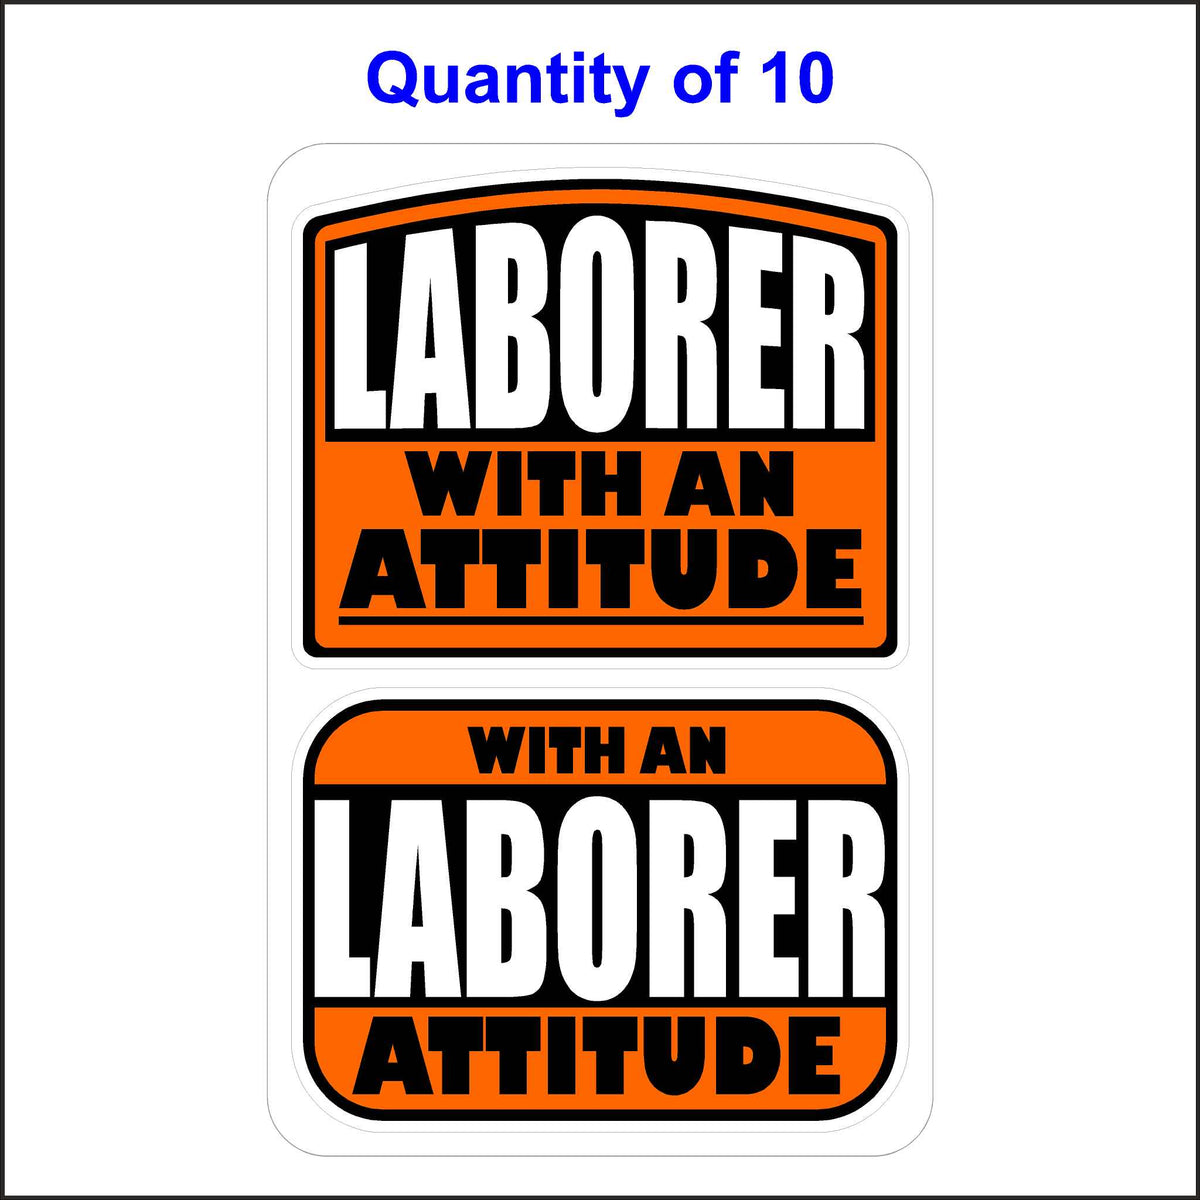 Laborer With An Attitude Stickers 10 Quantity.